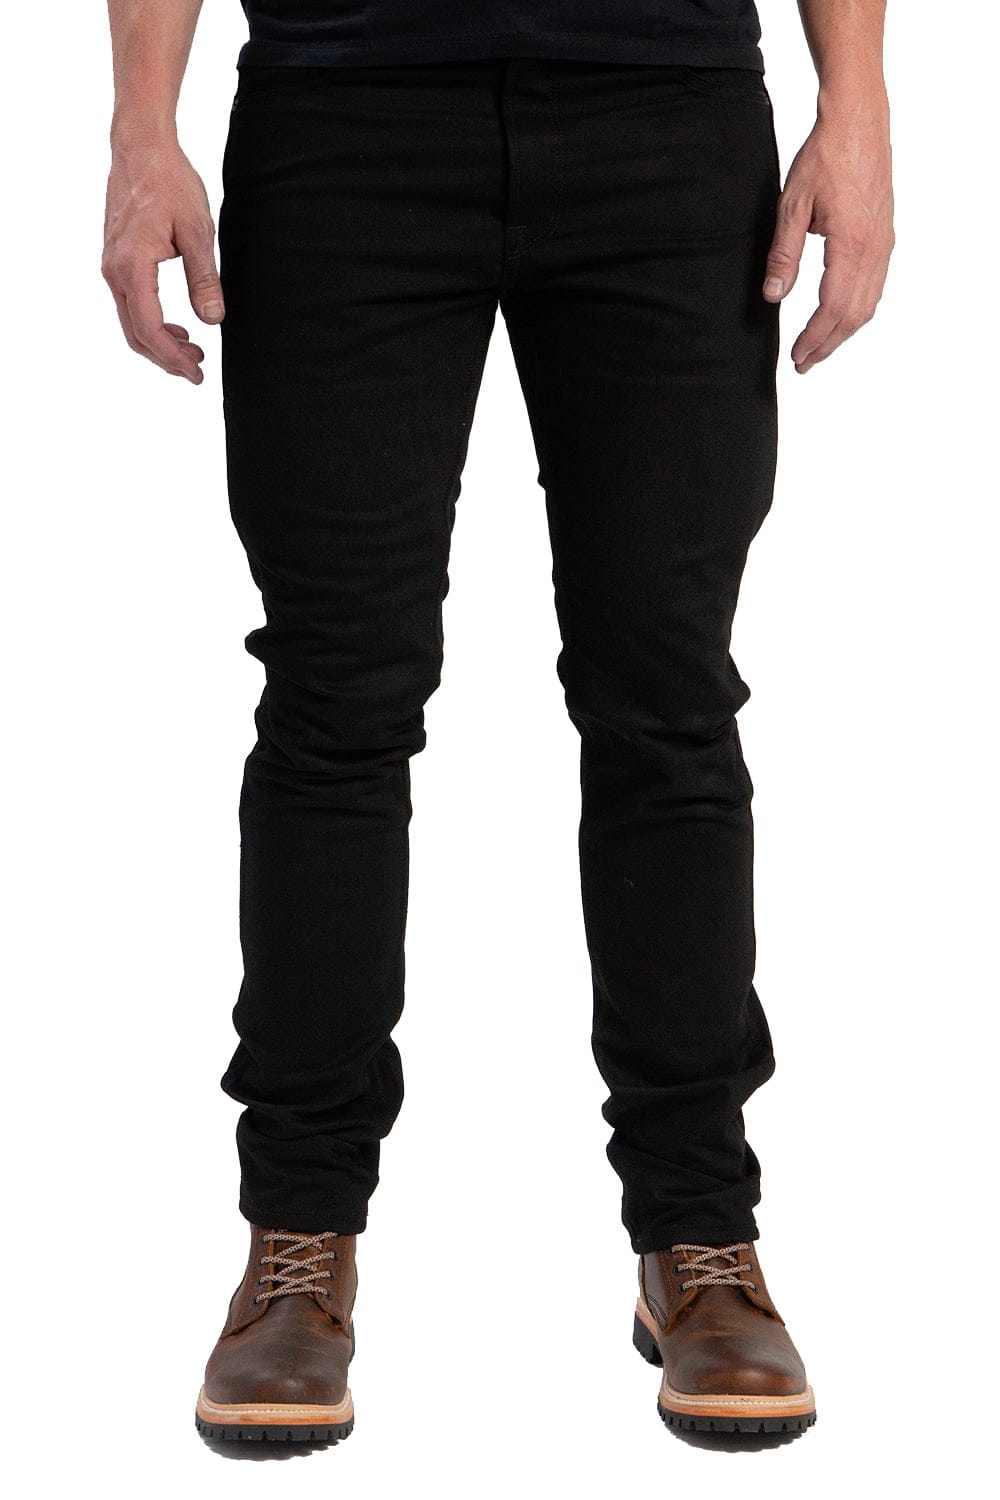 RIDING CULTURE Tapered Slim Fit Motorcycle Jeans 